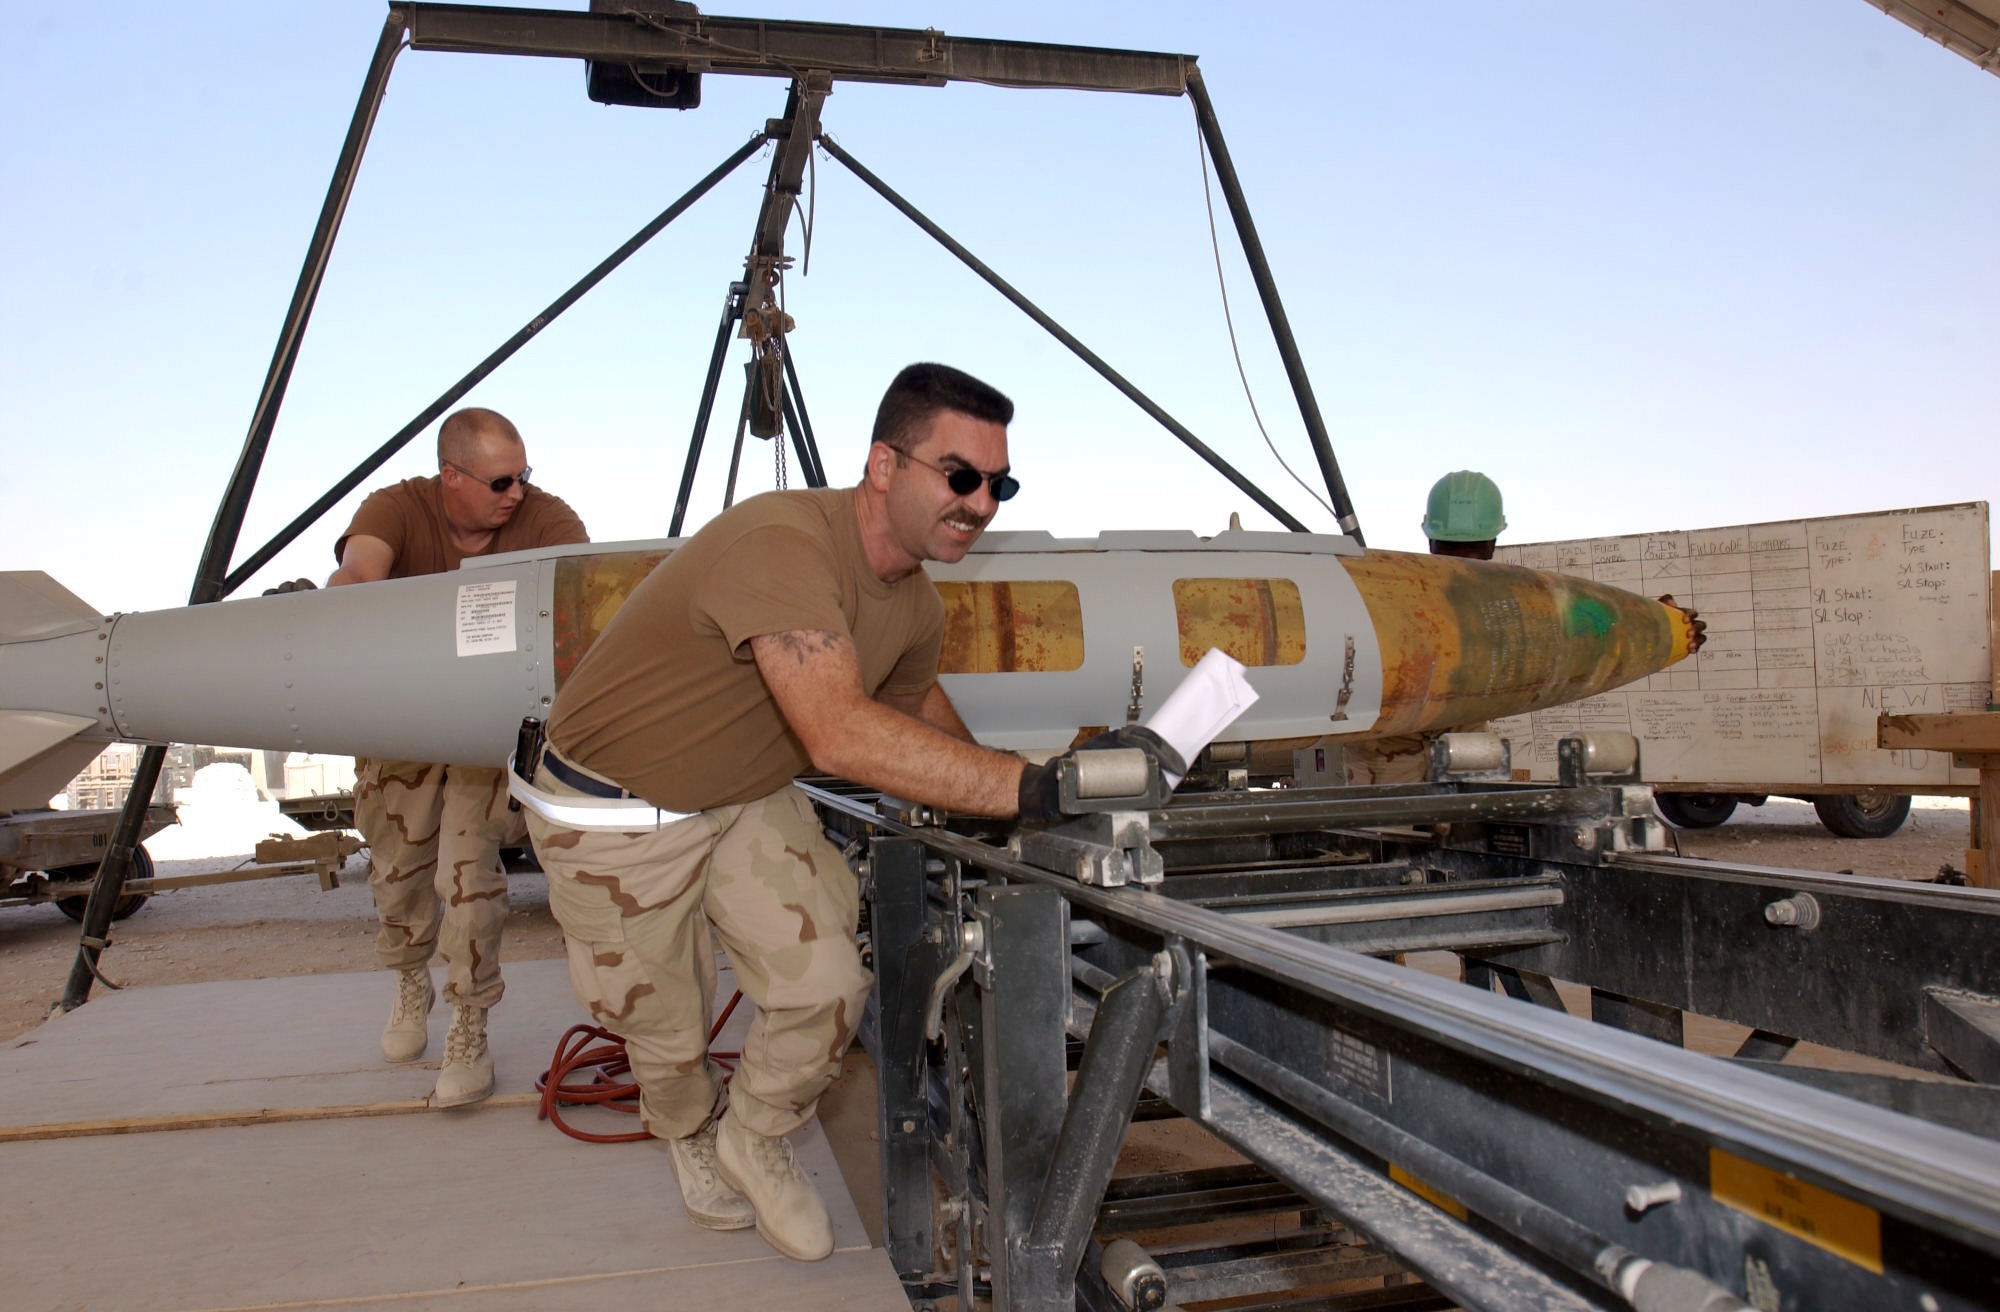 OPERATION IRAQI FREEDOM – (From left) Tech. Sgt. Chris Hickman, Master Sgt. Greg Lewis and Senior Airman Gerald Brown, all with the 379th Expeditionary Maintenance Squadron’s ammo flight, move a GBU-31 Joint Direct Attack Munition into position for disassembly and shipment at a forward-deployed location.  (U.S. Air Force photo by Staff Sgt. David Donovan